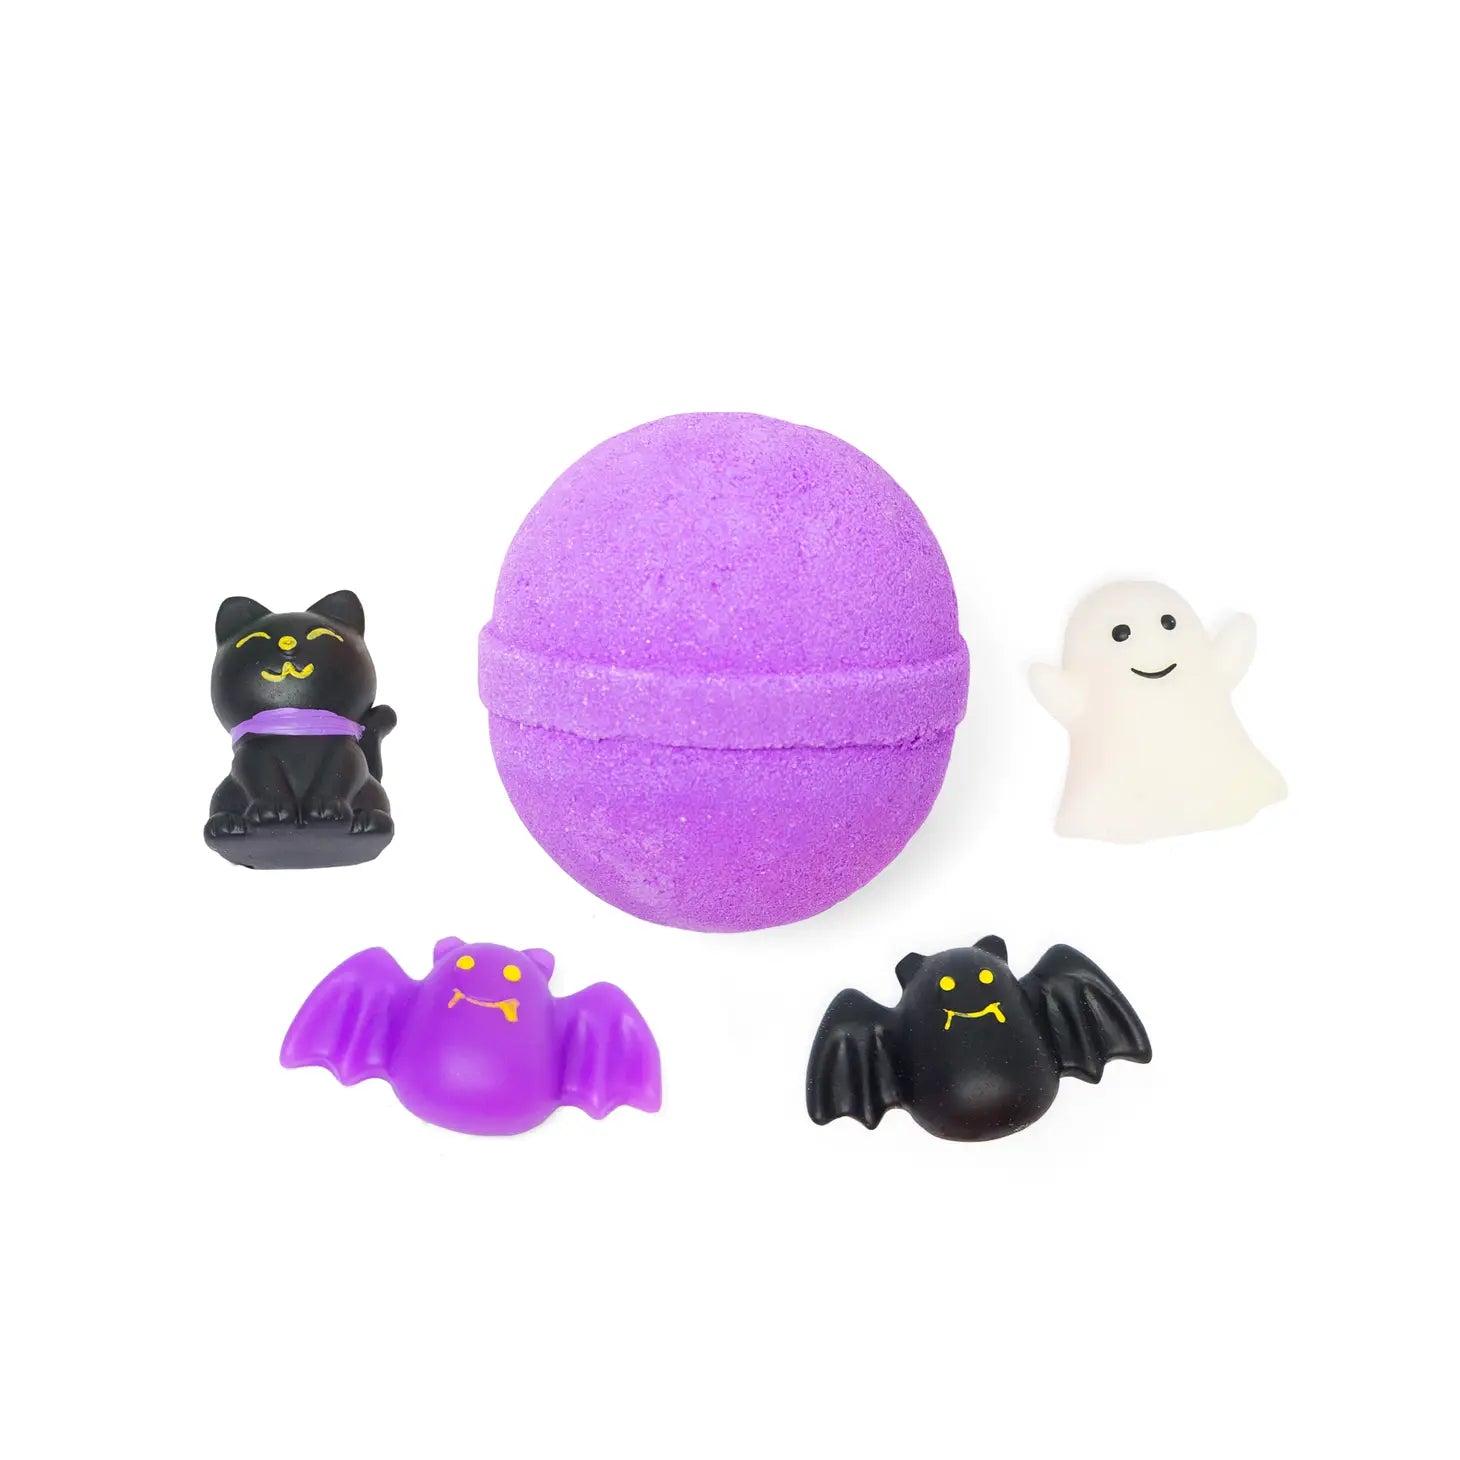 Halloween Surprise Bath Bombs Limited Edition